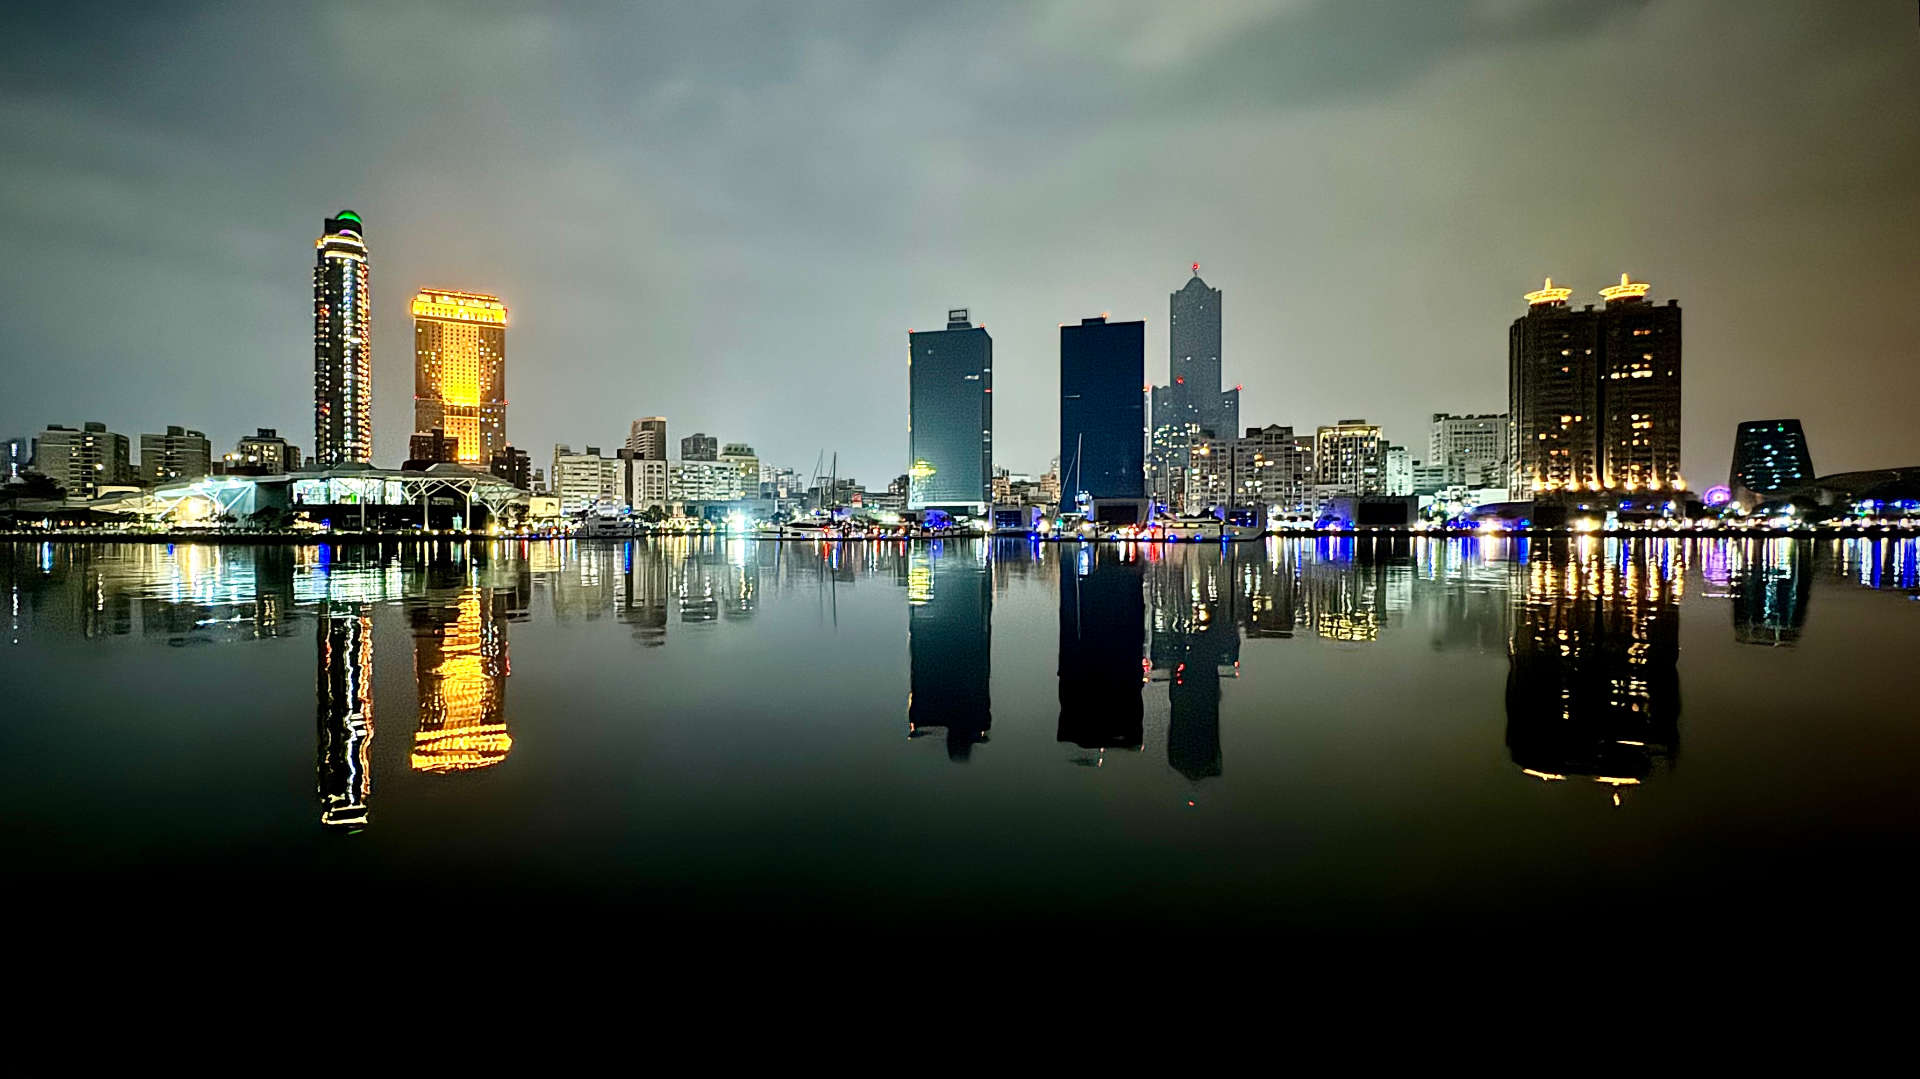 Nighttime view of Kaohsiung skyscrapers from across the harbor.